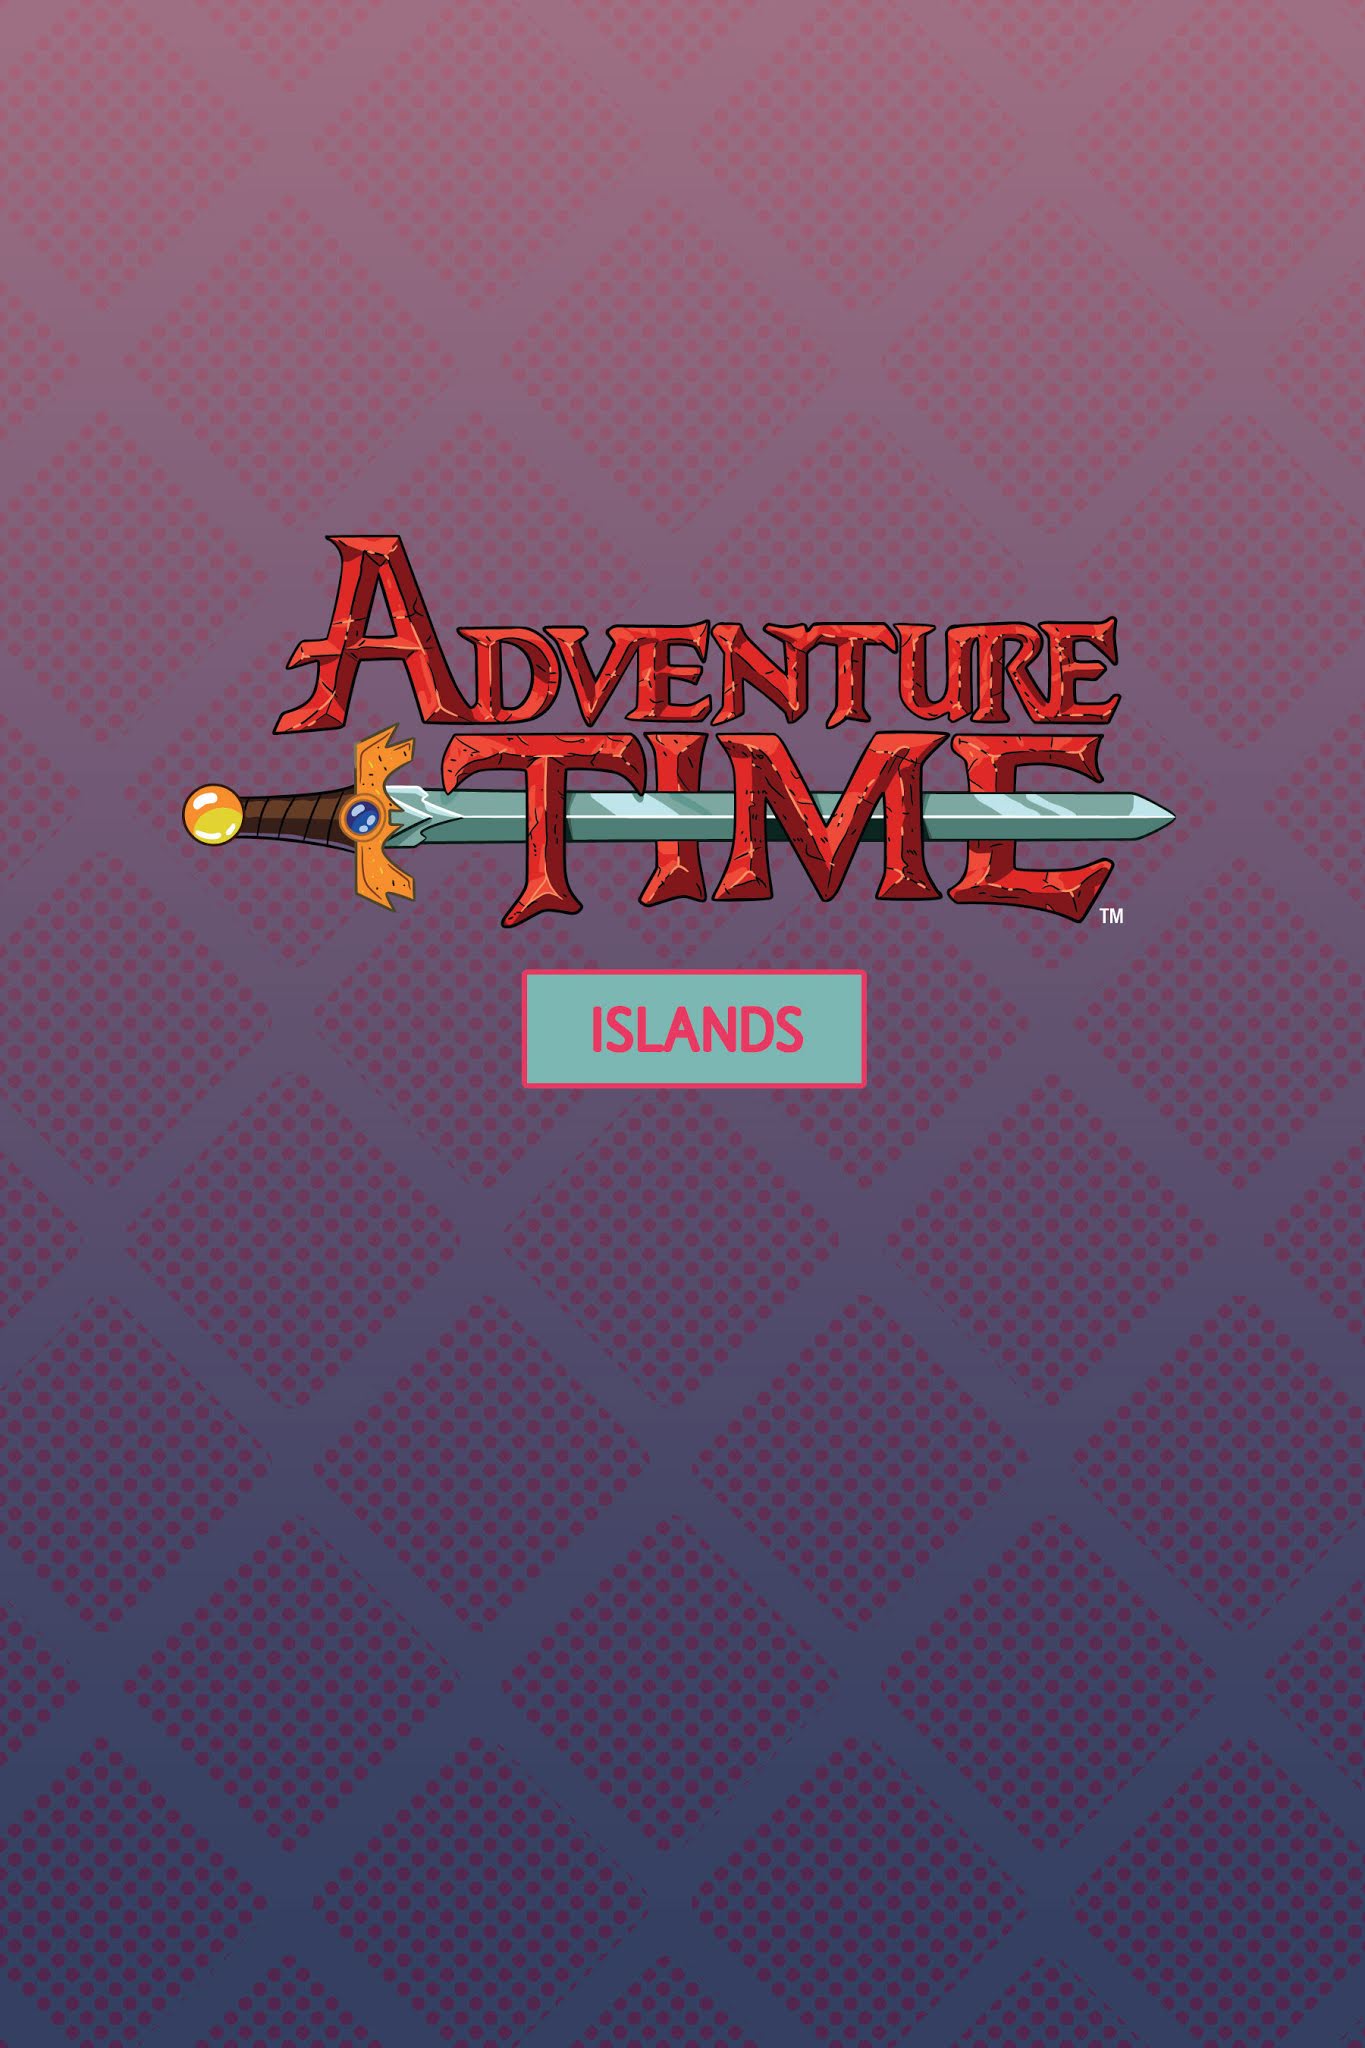 Read online Adventure Time: Islands comic -  Issue # TPB - 2